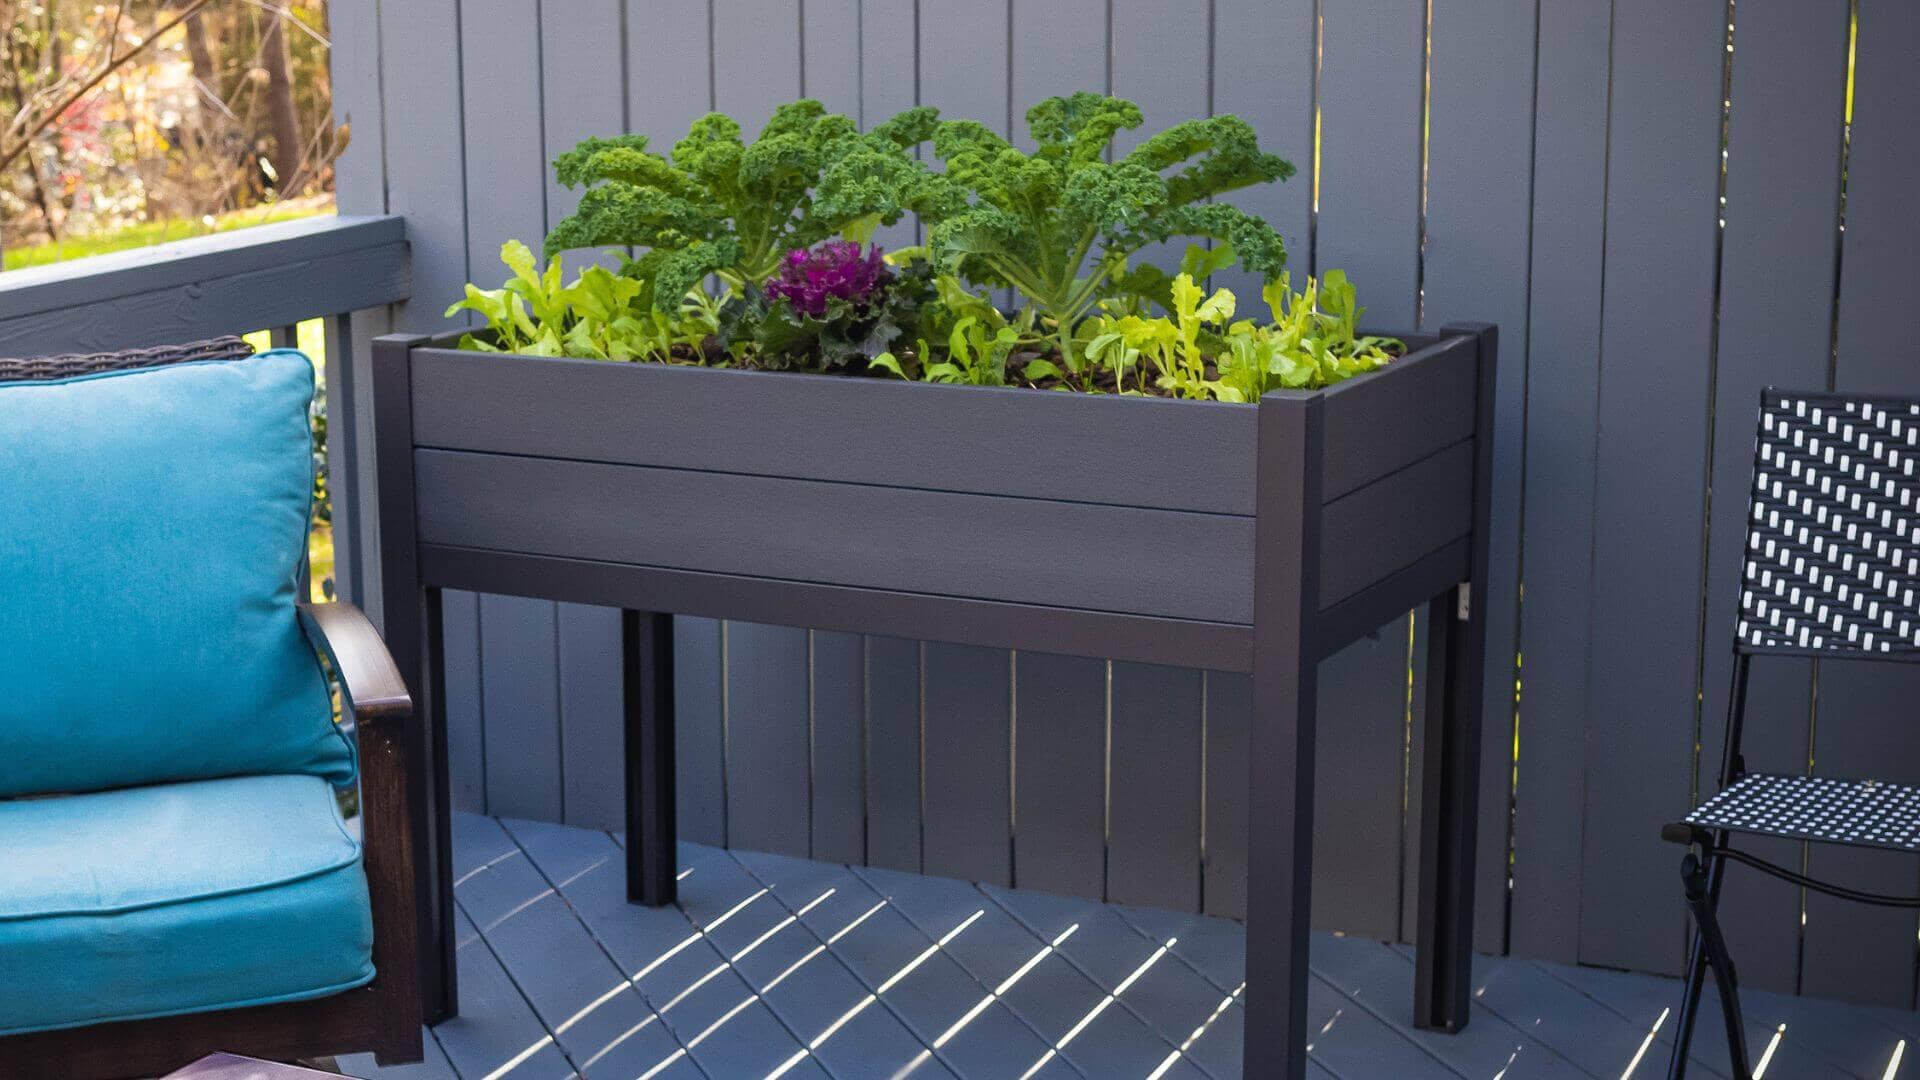 The Elevated Escape (24” x 48” x 34.5”) Elevated Garden Bed